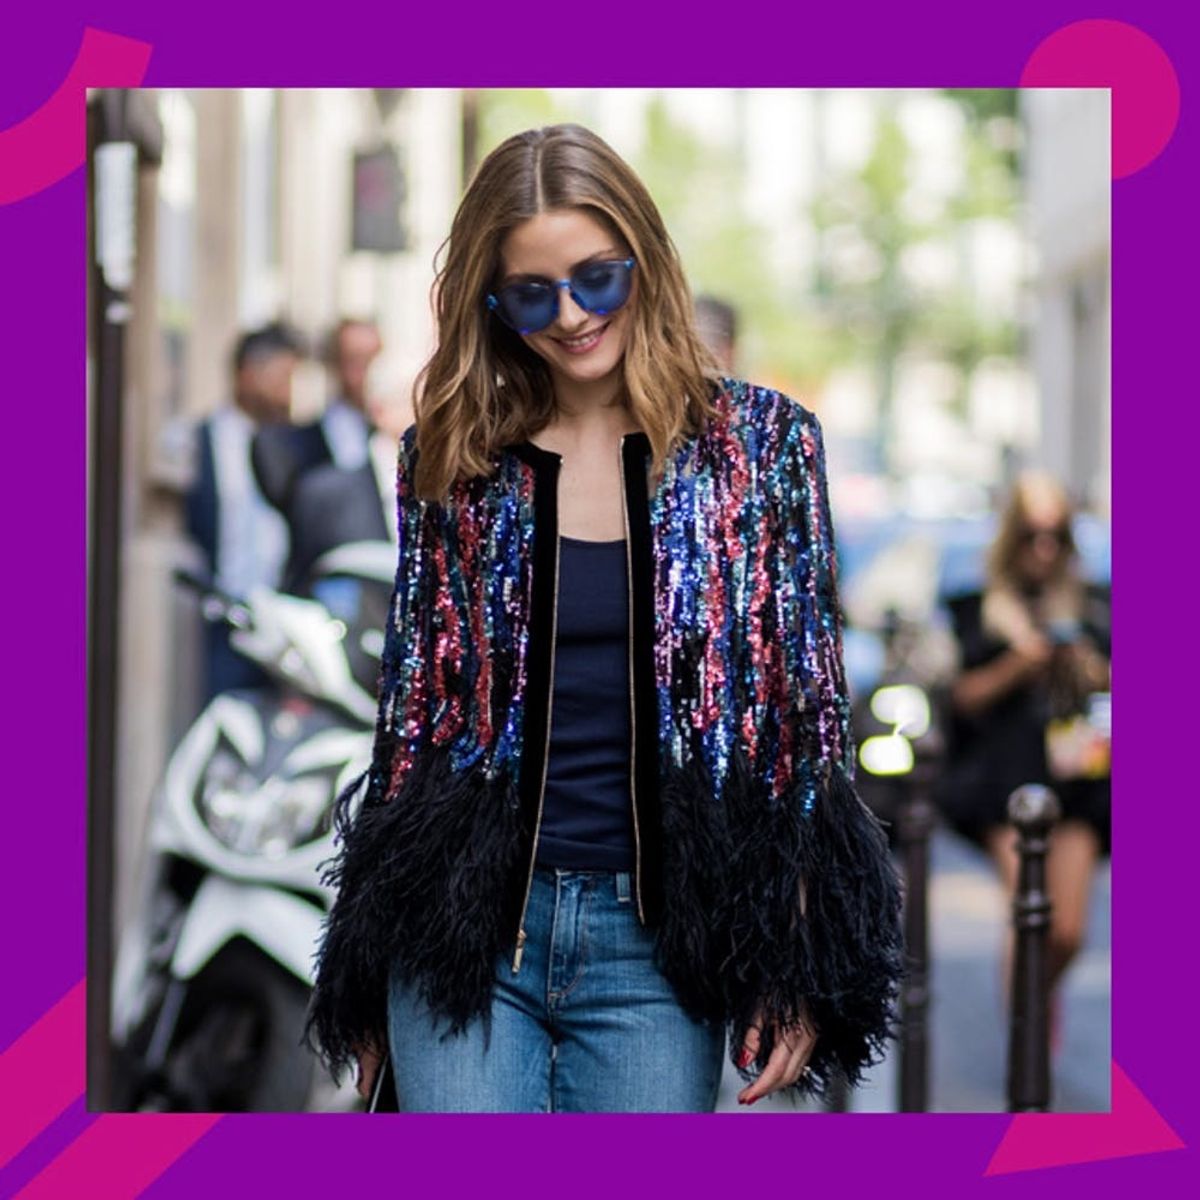 How to Wear the Celebrity-Approved Sequin Party Jacket Trend This Season